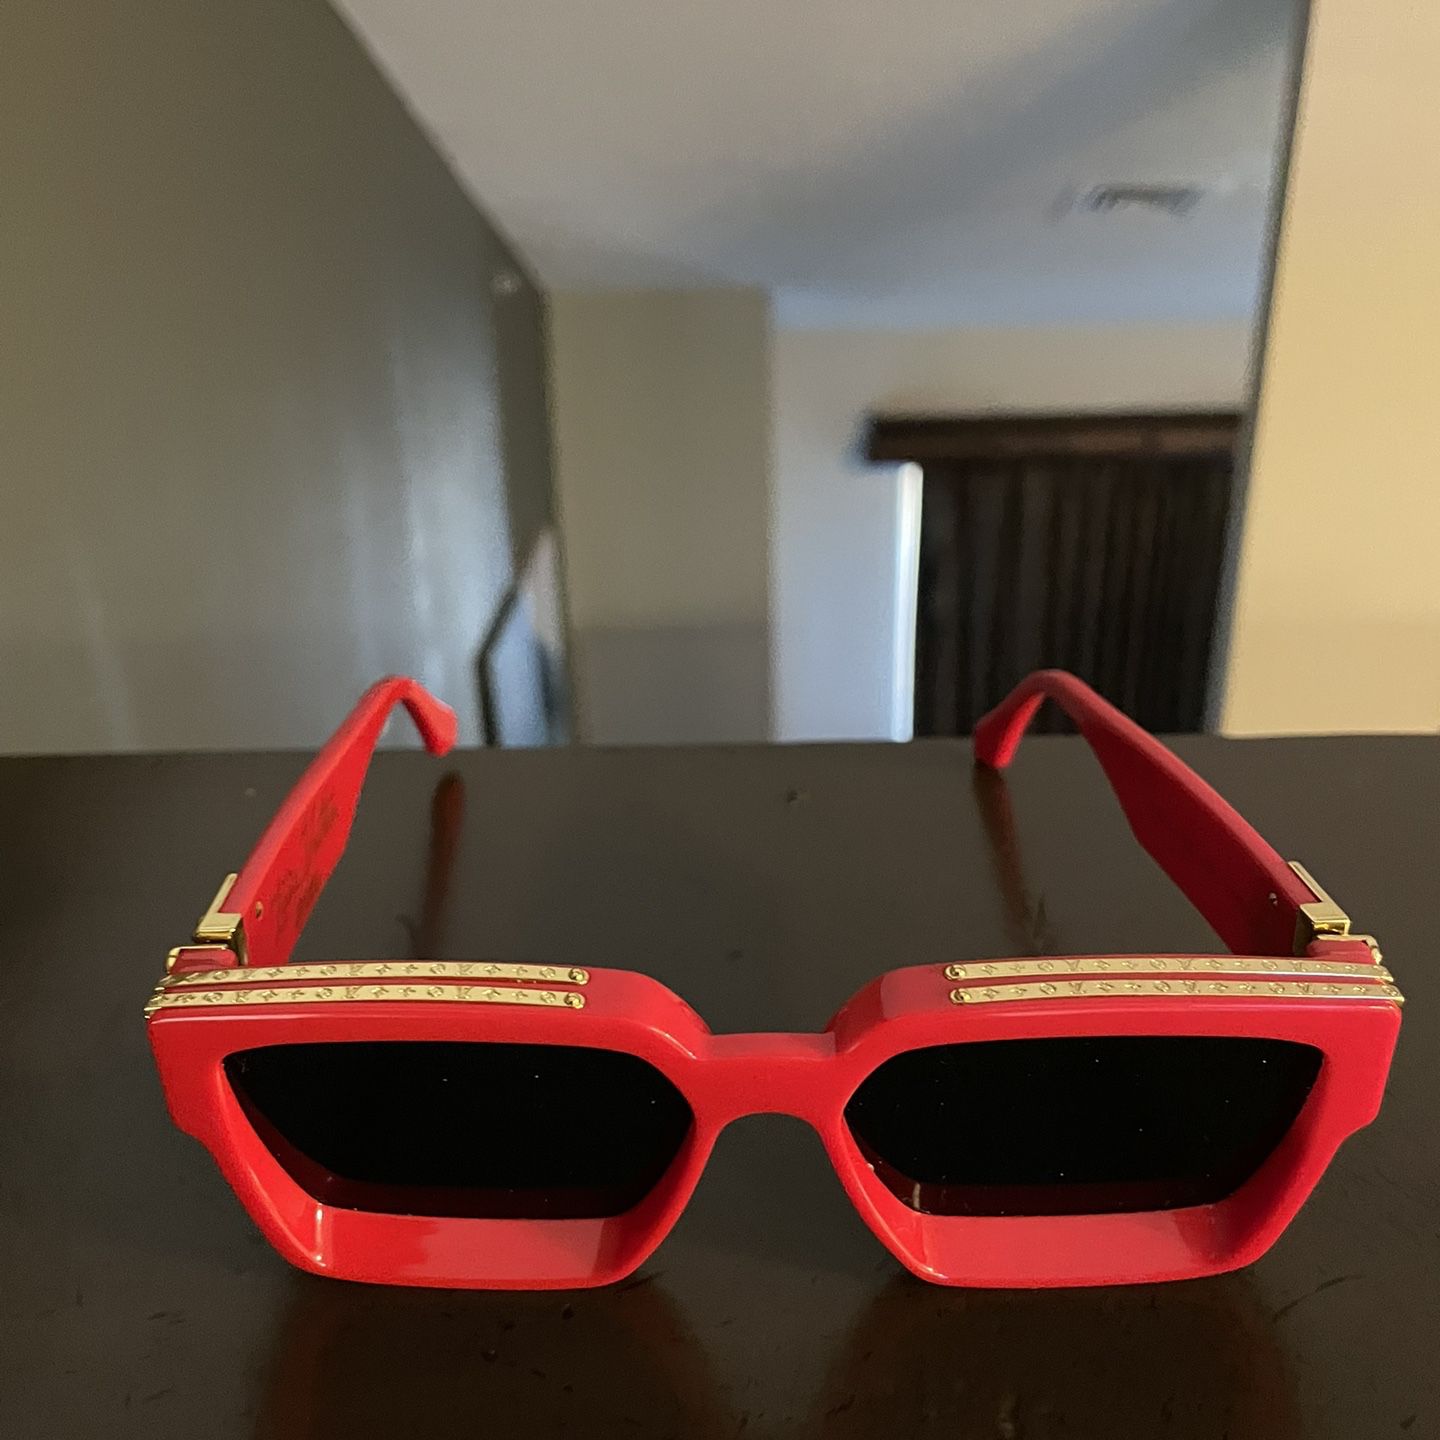 Louis Vuitton Millionaire Glasses for Sale in Brooklyn, NY - OfferUp